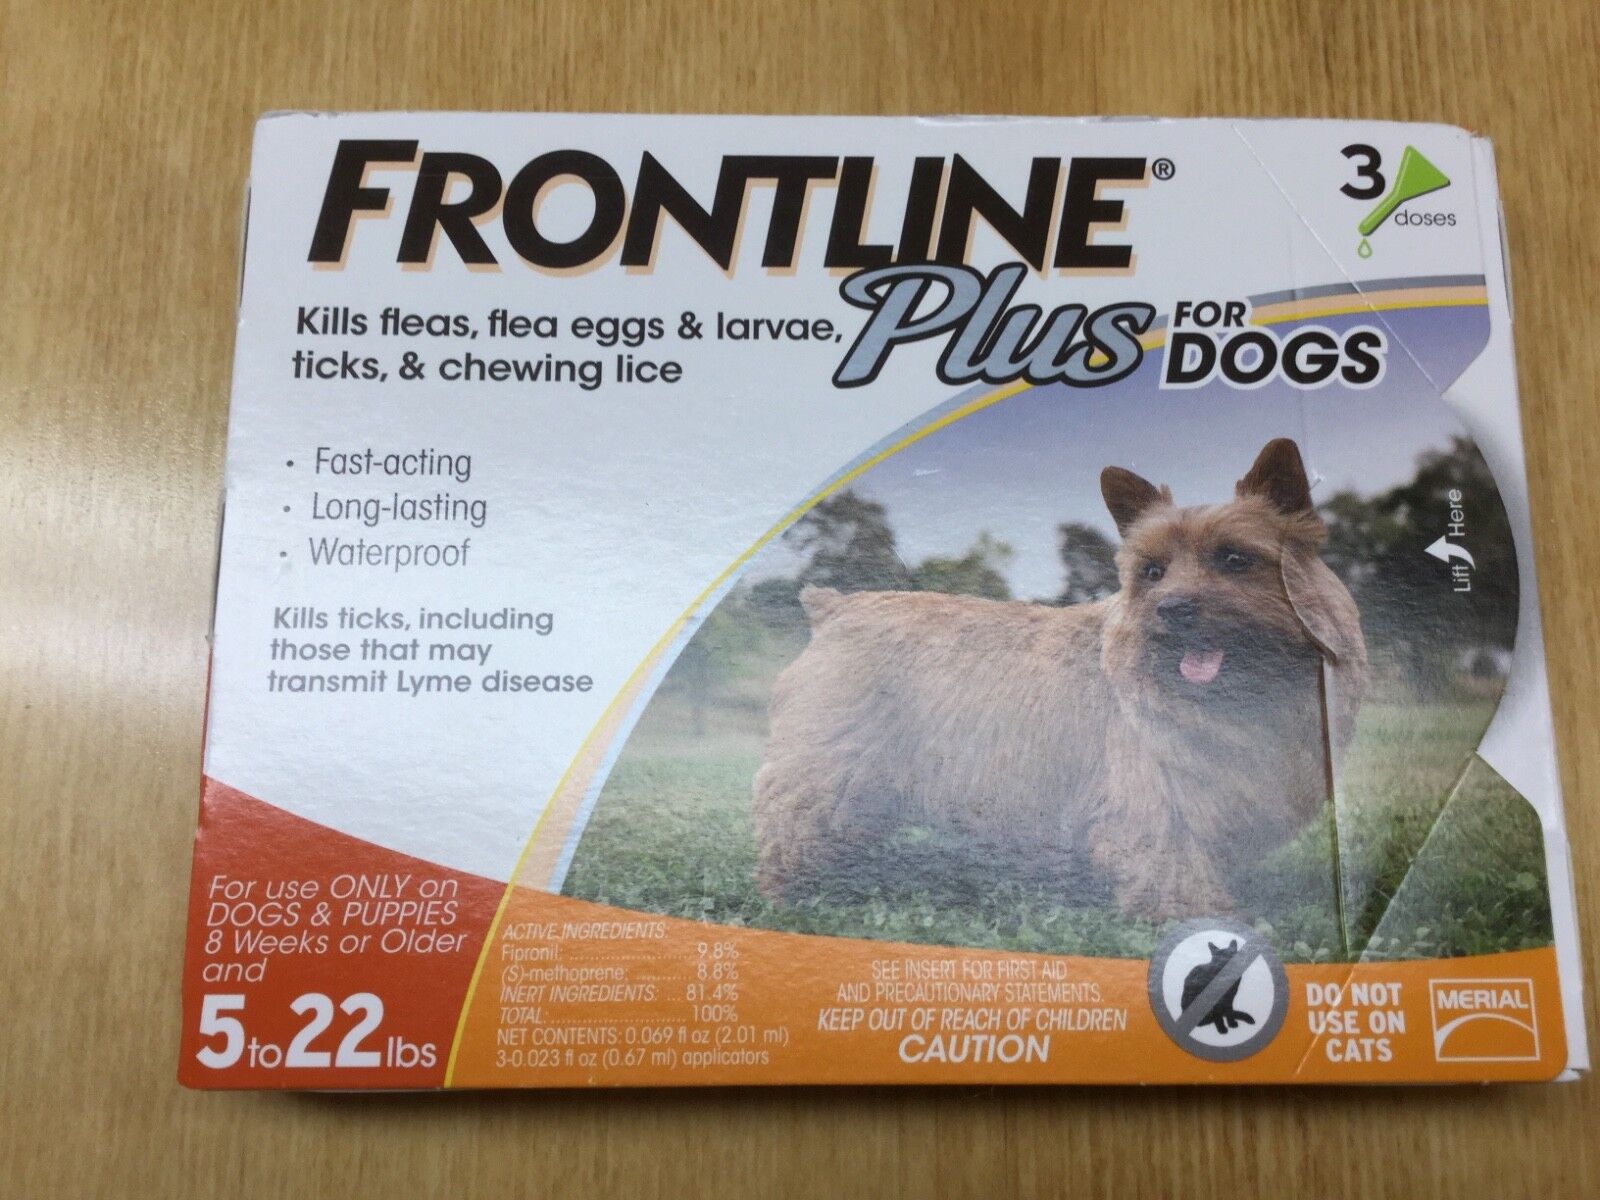 Frontline plus for dogs 5 to 22 Lbs. 100 % Genuine U.S EPA approved (3 pack)